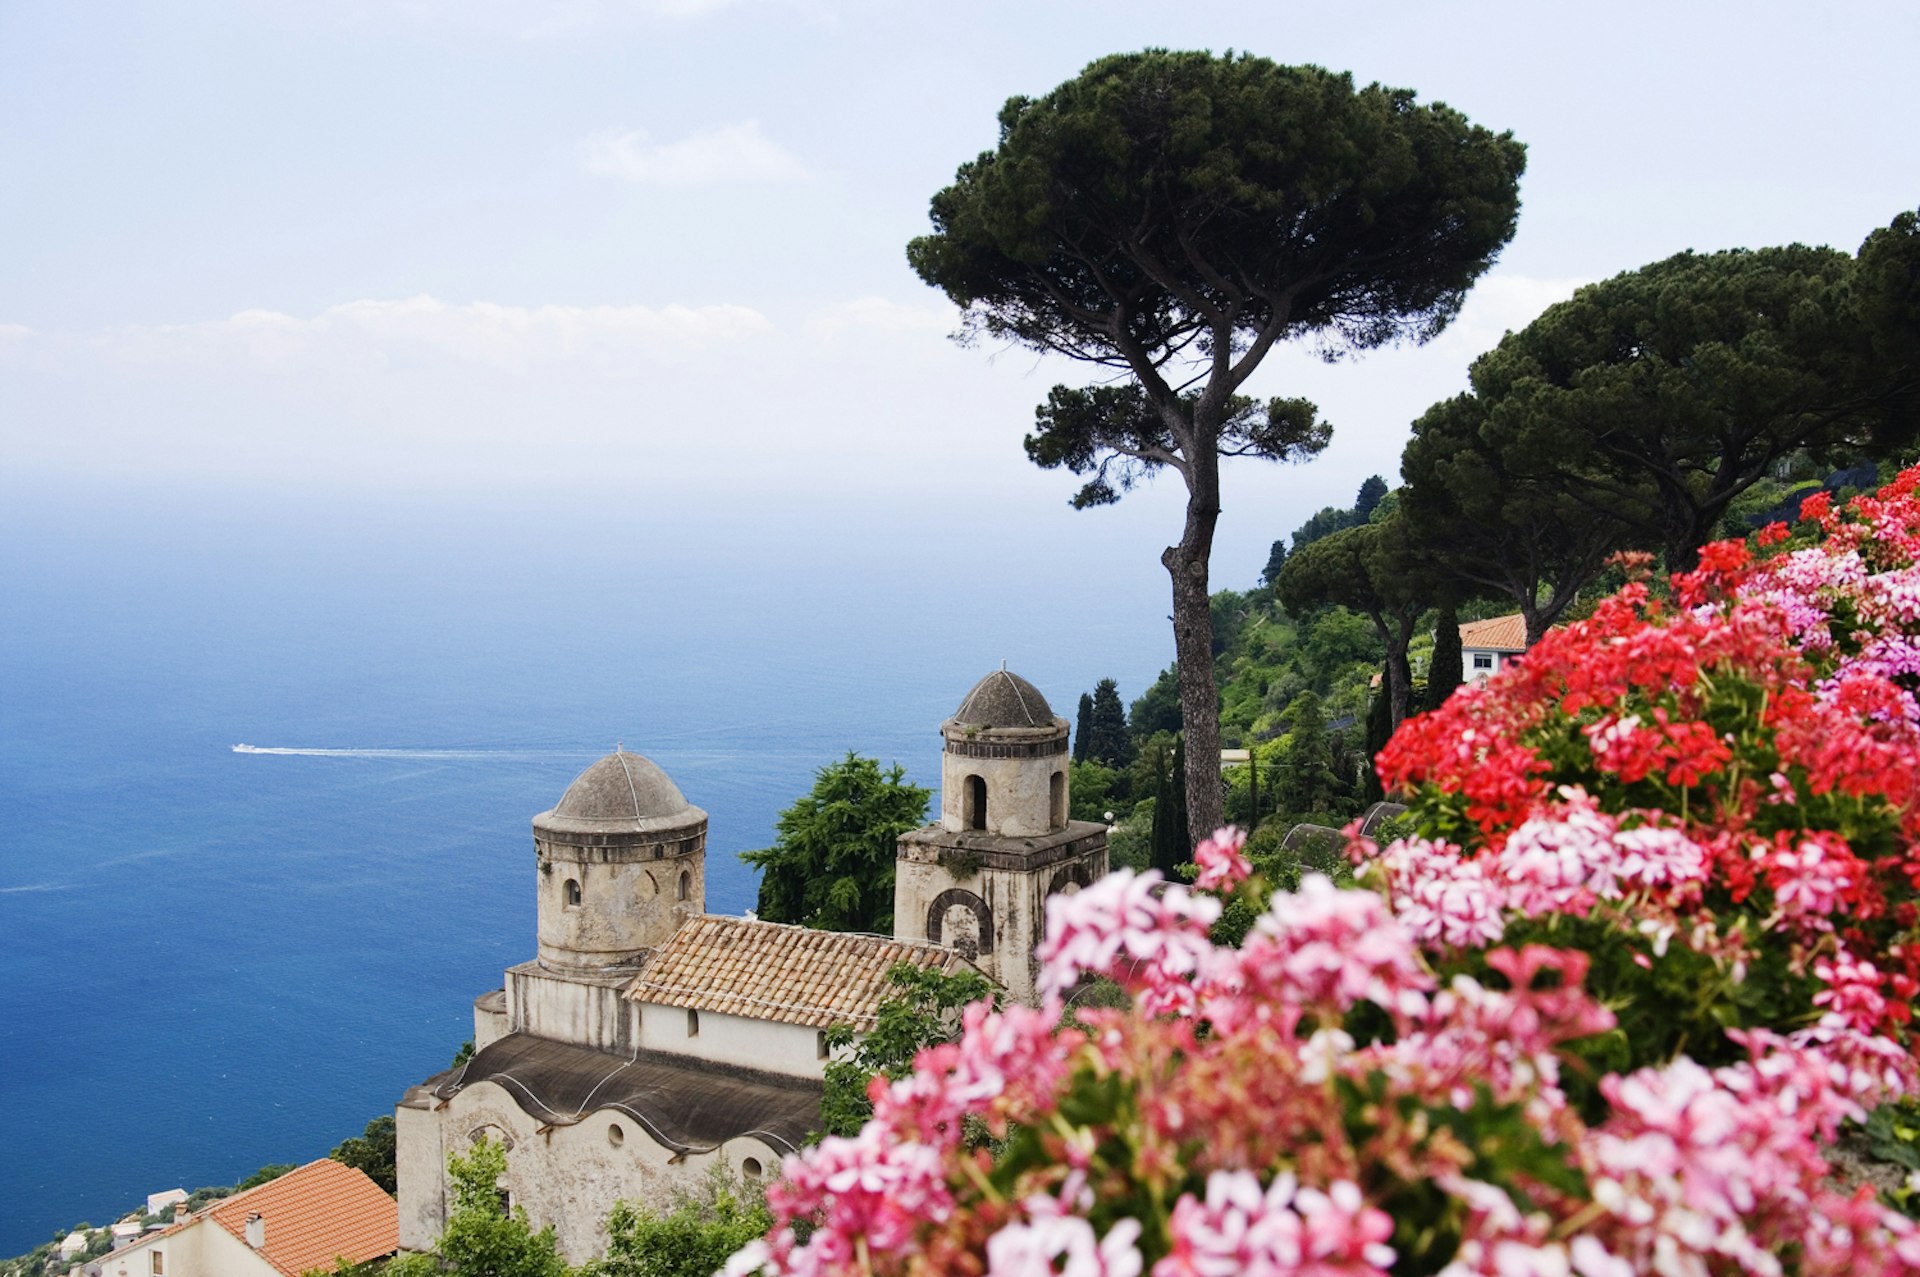 The view from Villa Rufolo Gardens in Ravello. Image by Jeremy Woodhouse / DigitalVision / Getty